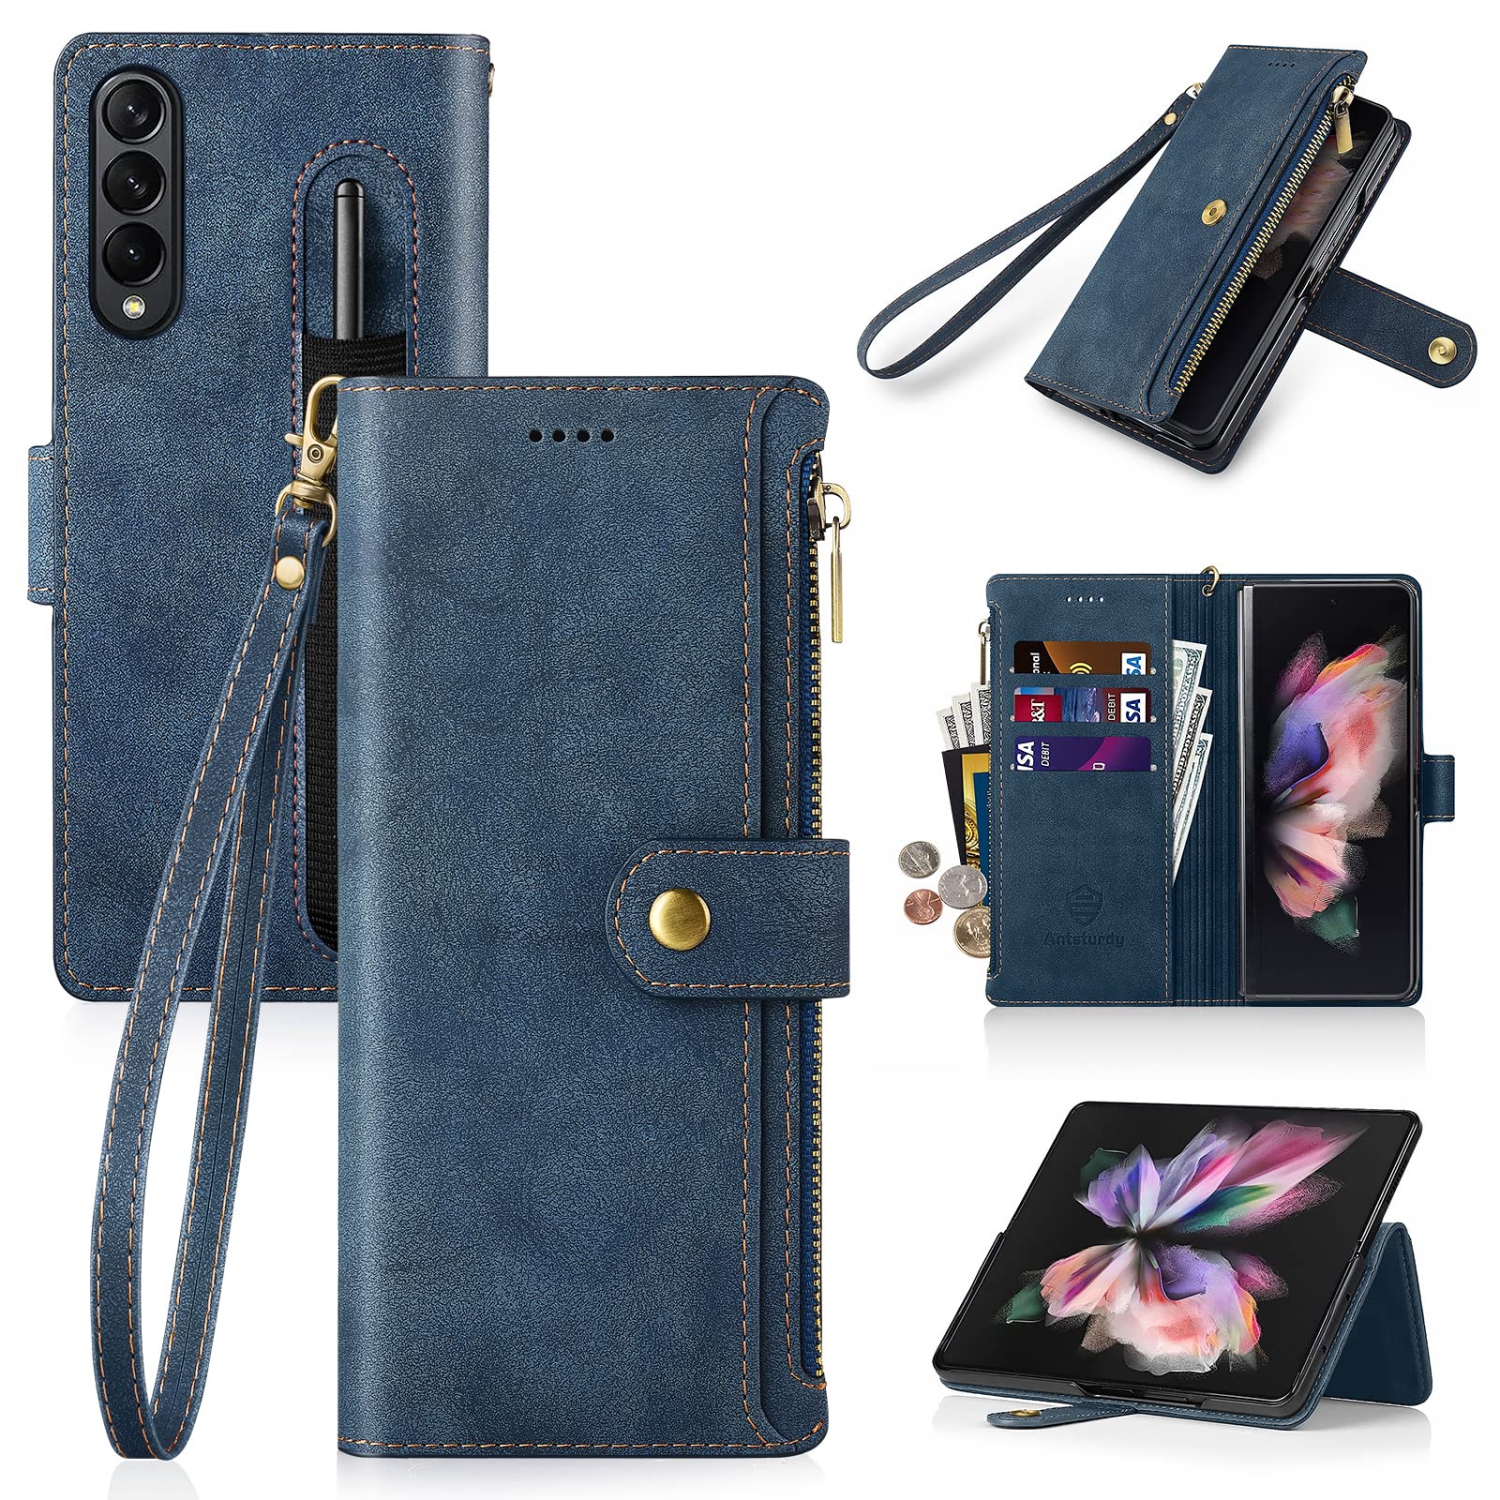 Antsturdy for Samsung Galaxy Z Fold 3 5G Wallet Case with S Pen Holder,PU Leather Folio Flip Protective Cover Slot Wrist Str